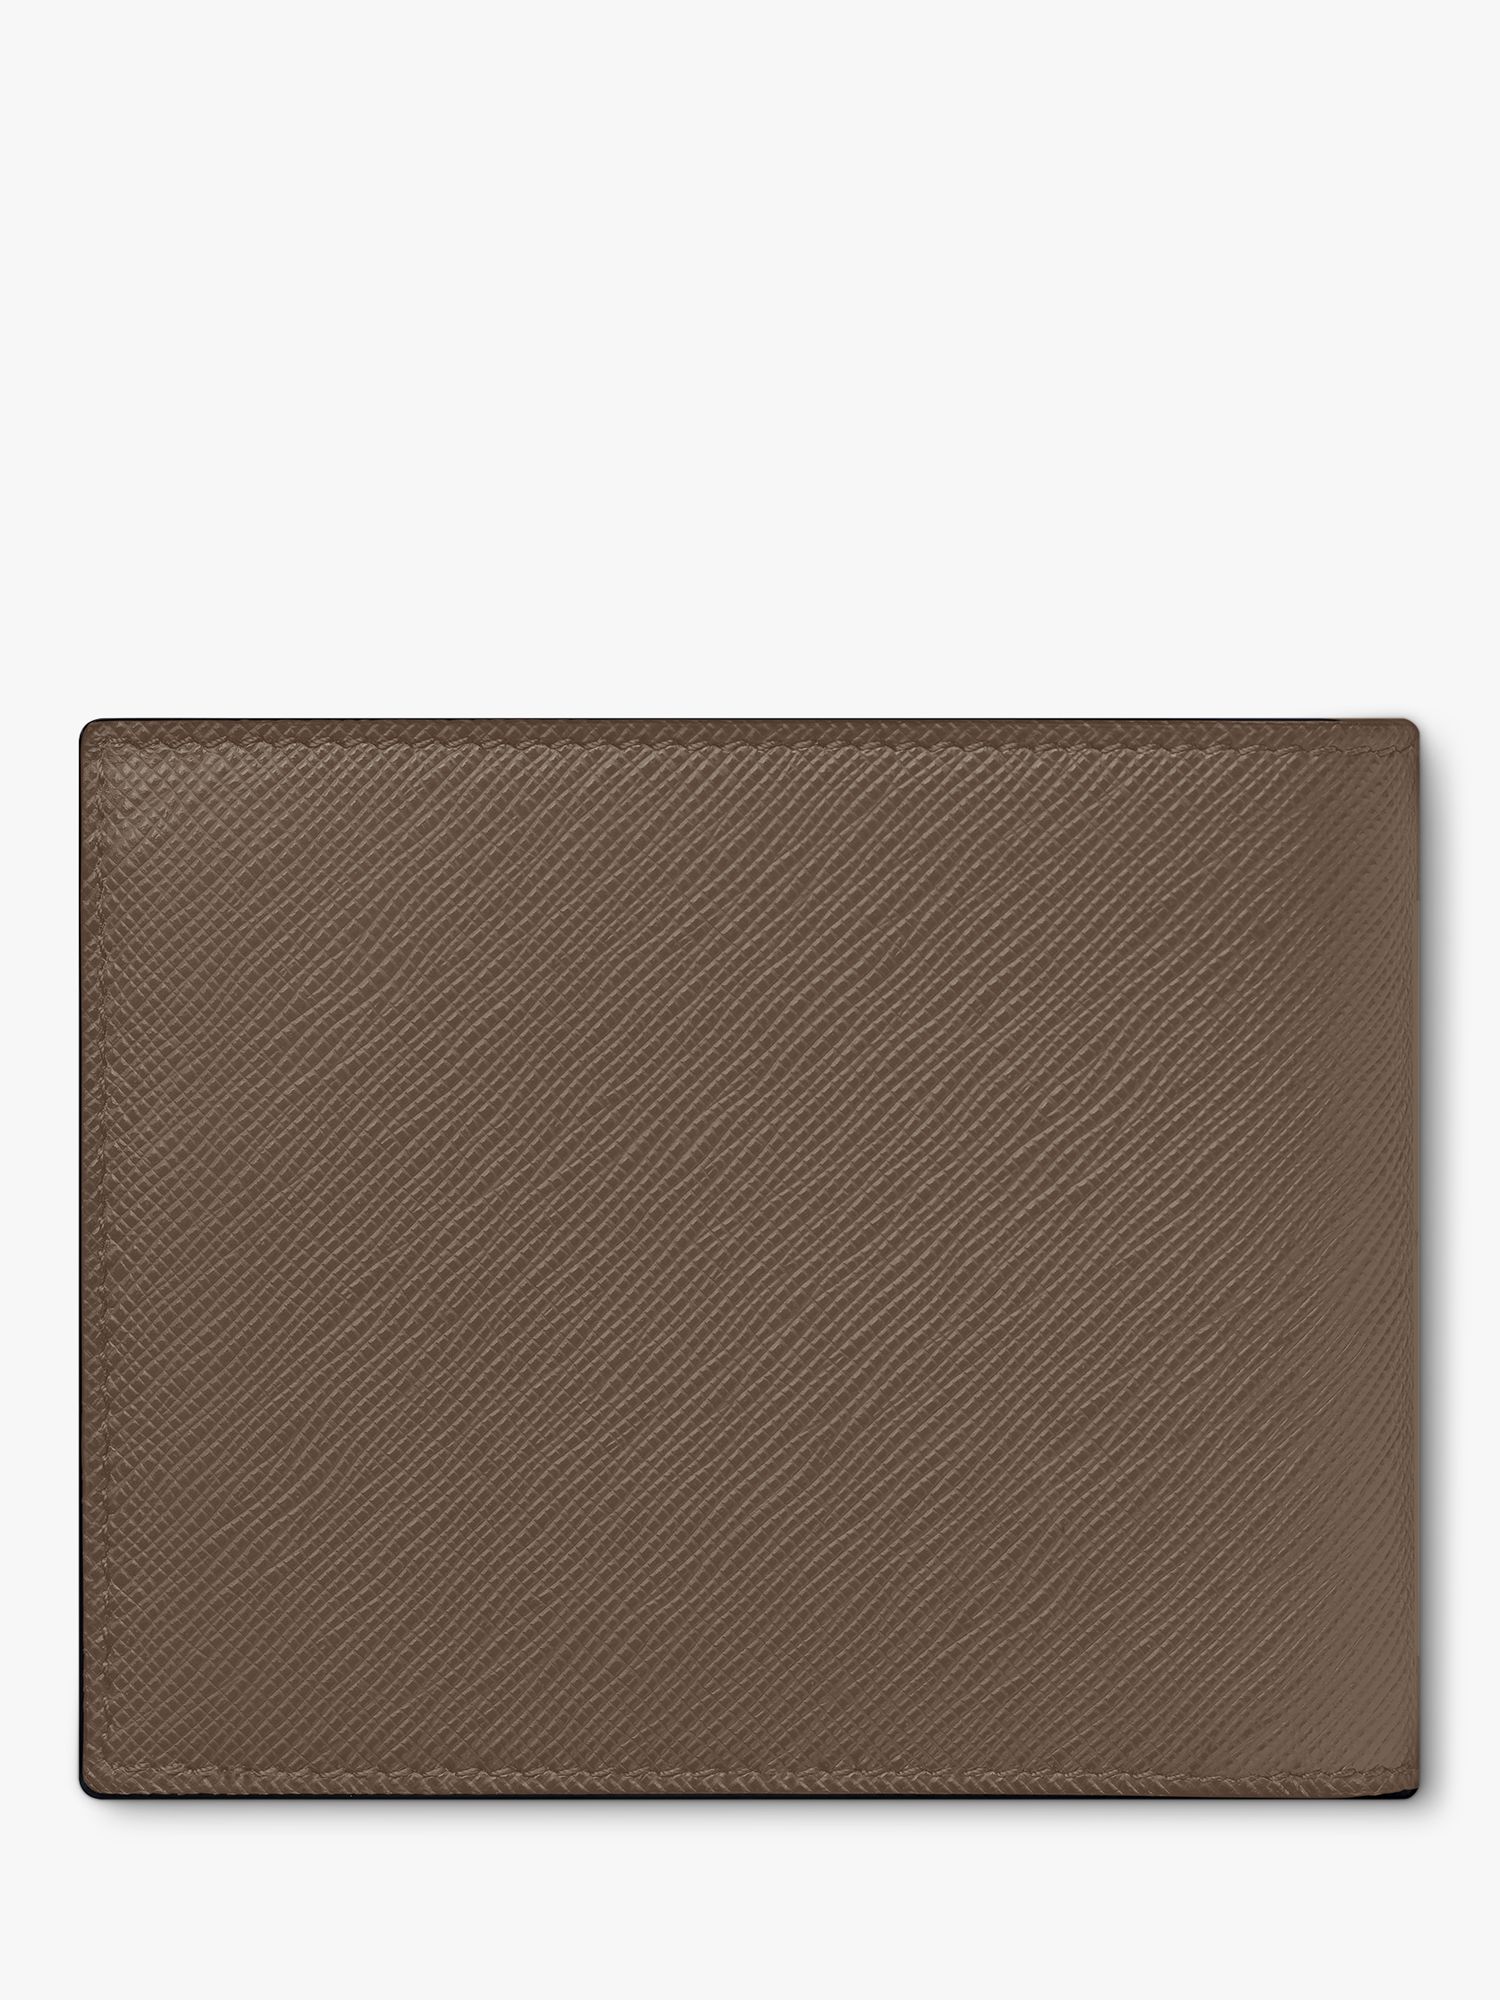 Buy Montblanc Sartorial 6 Card Leather Wallet Online at johnlewis.com